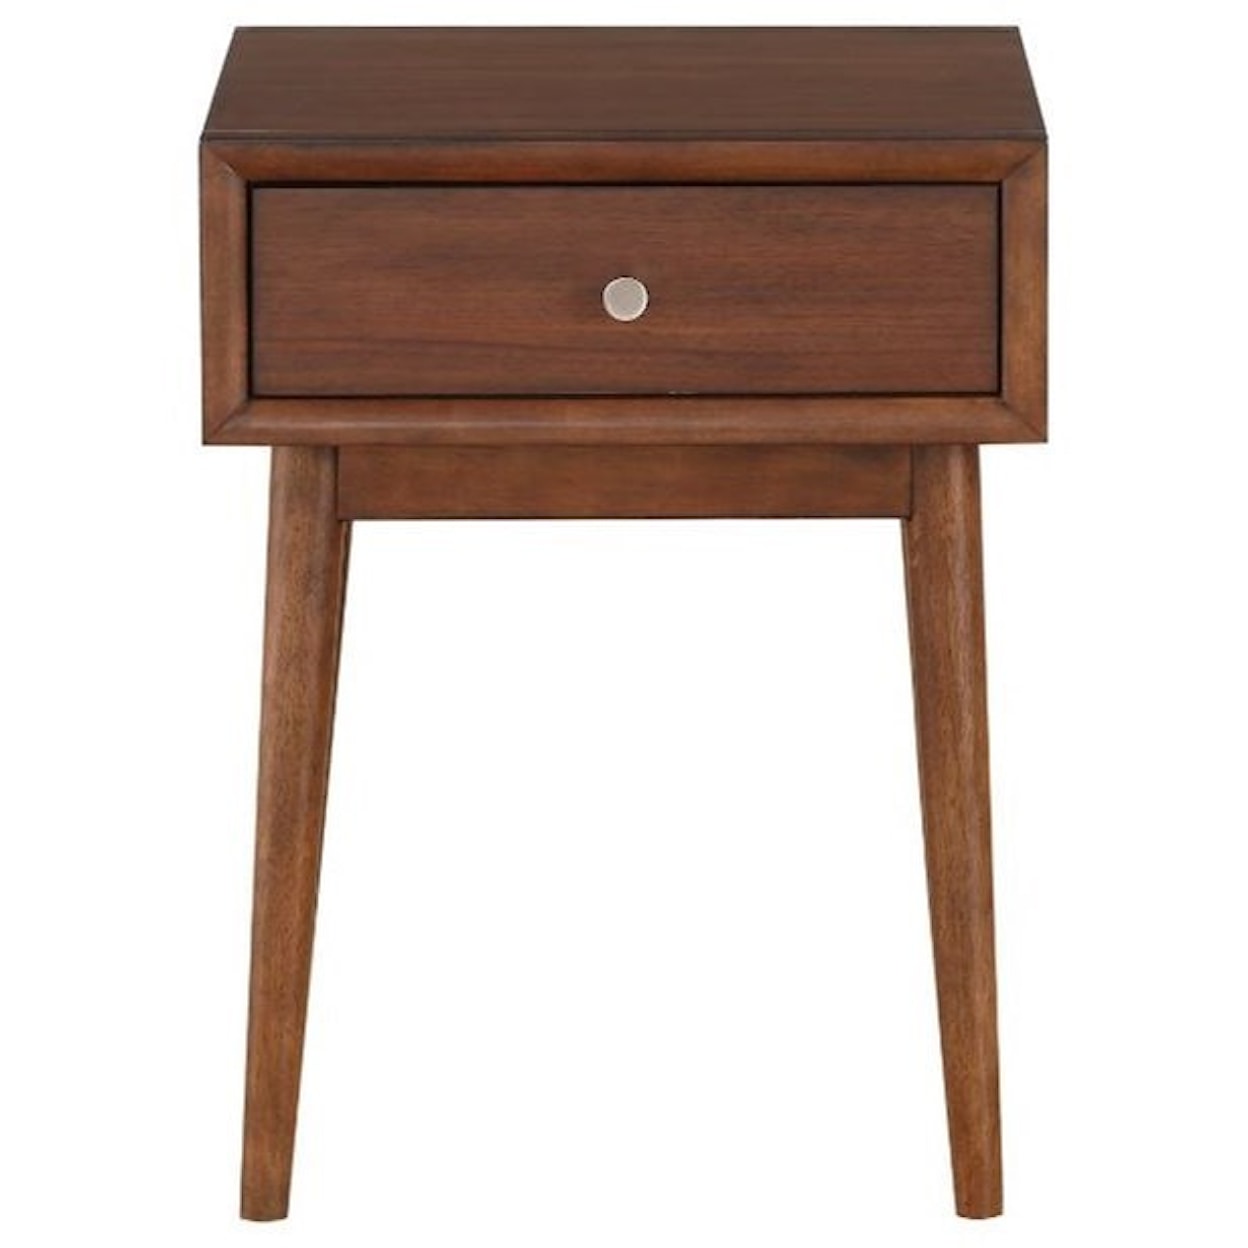 Homelegance Frolic End Table with Drawer